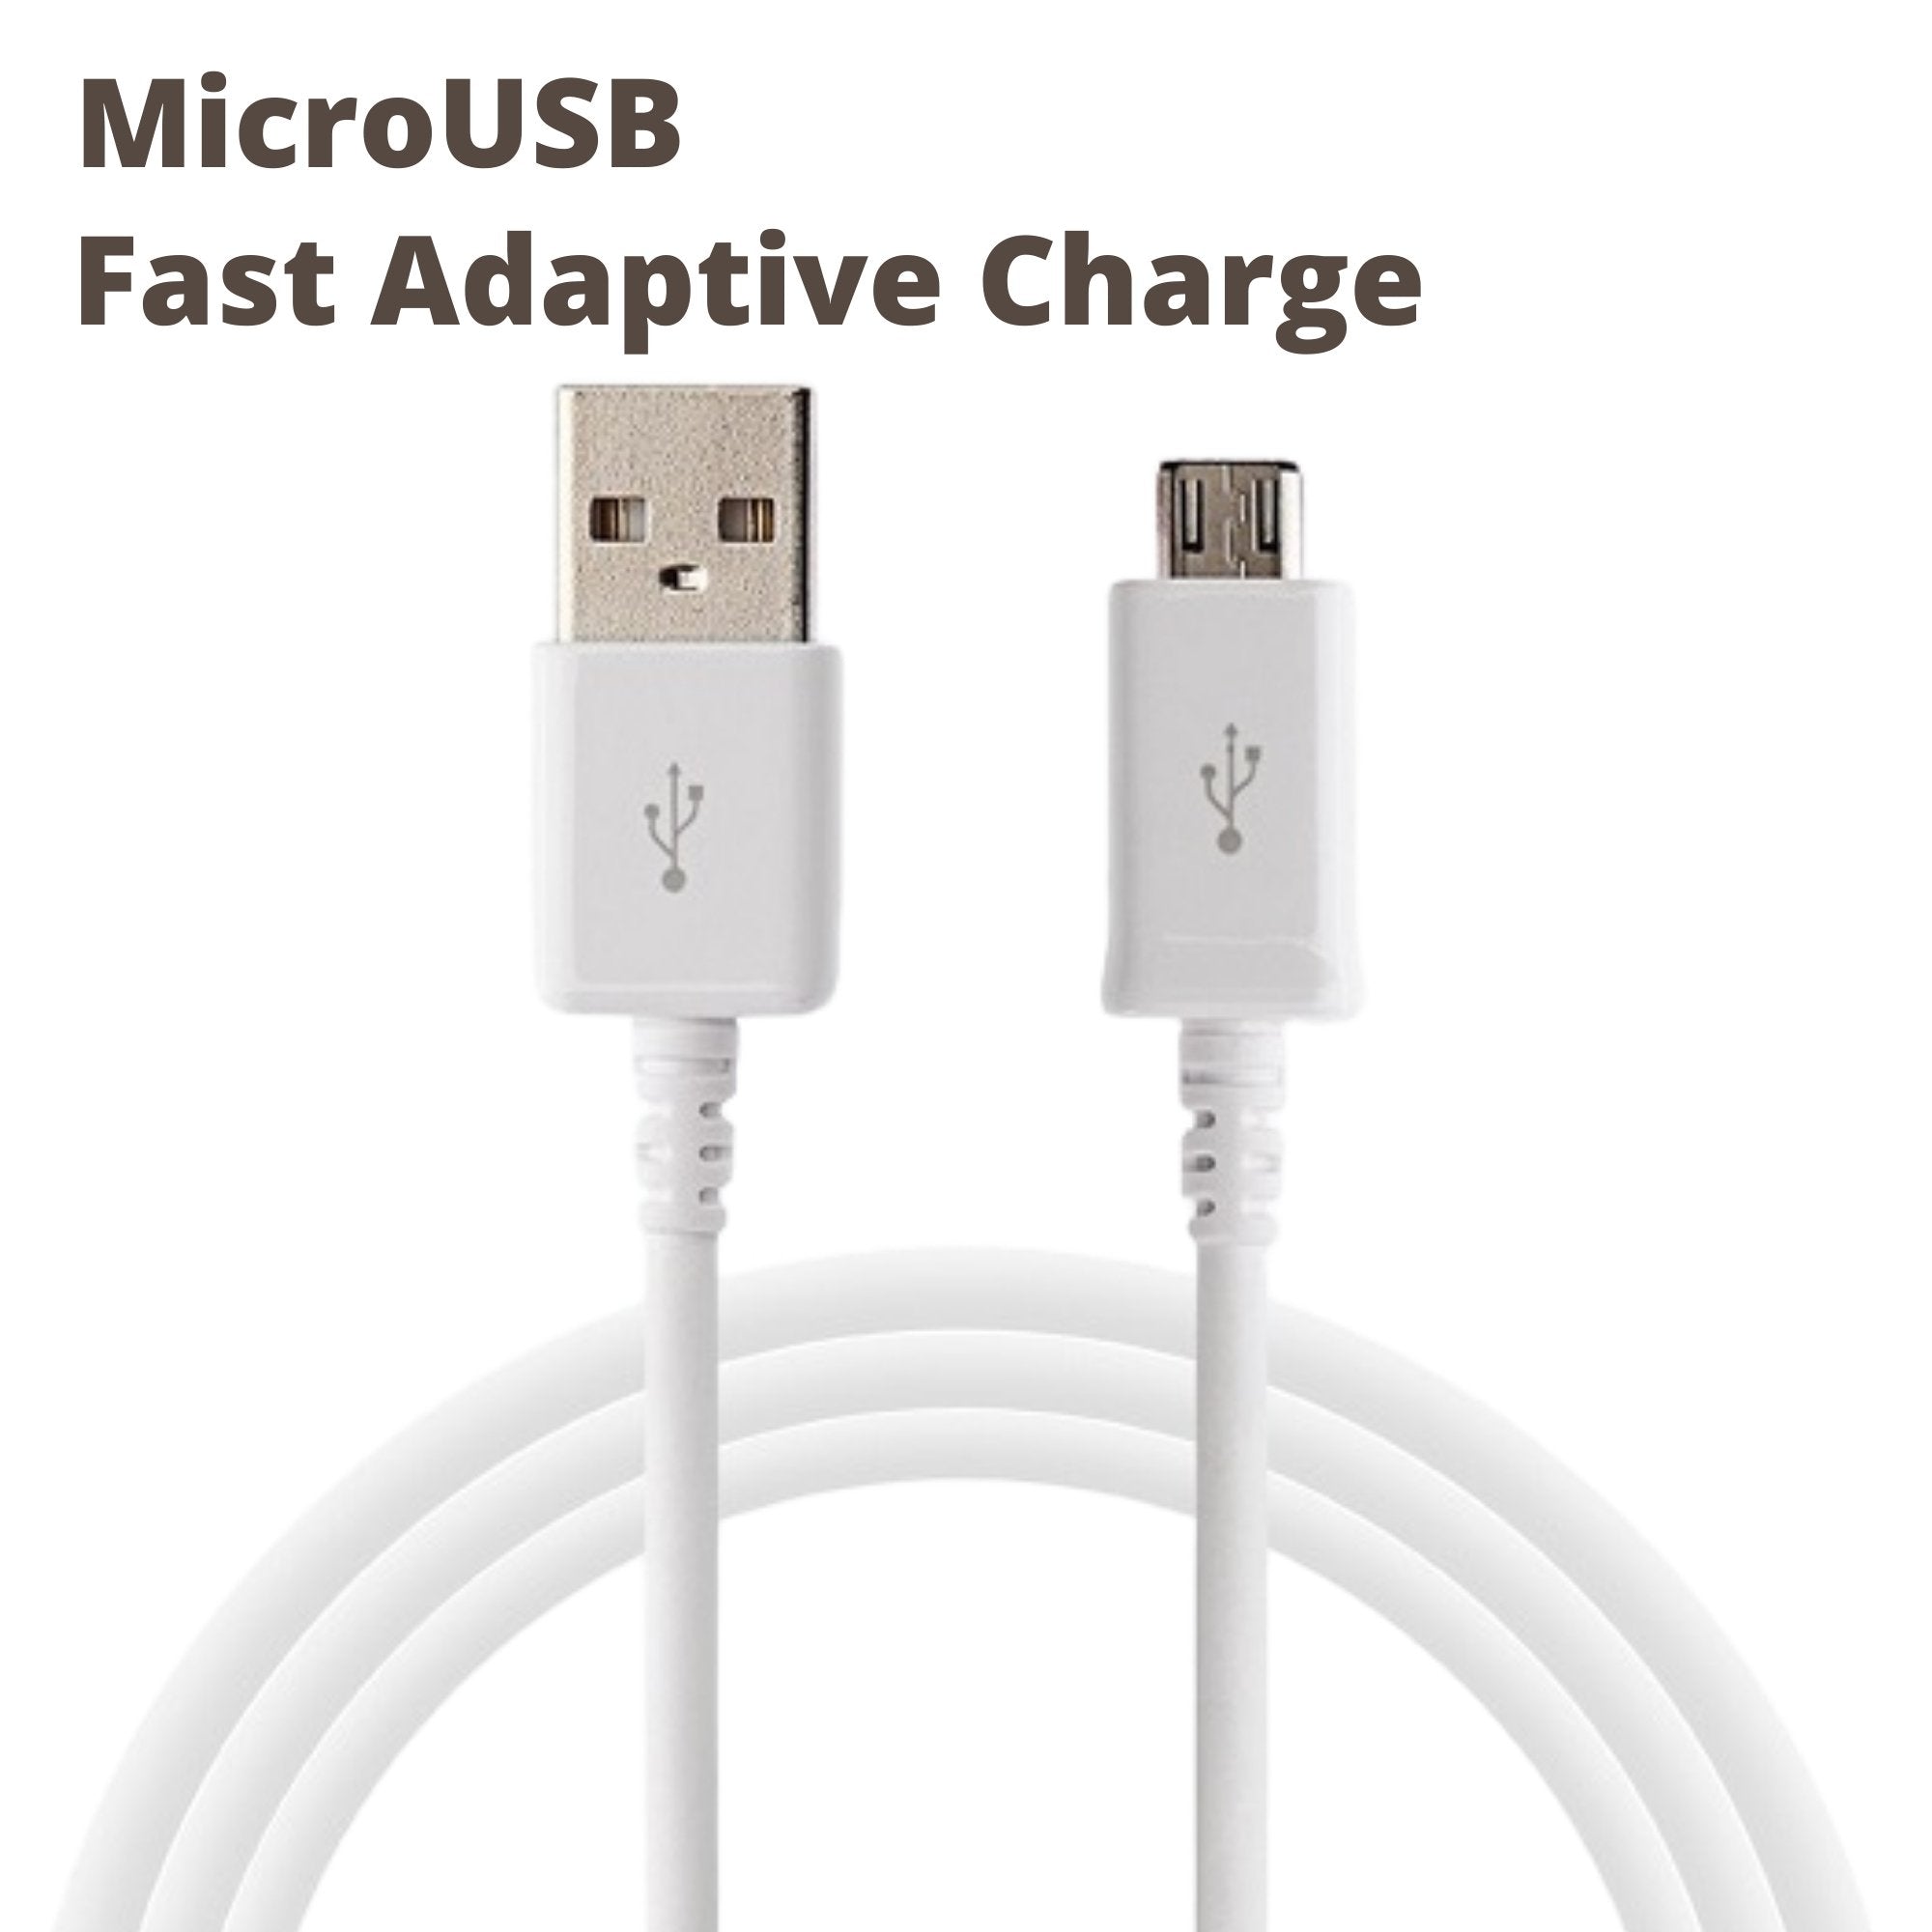 Samsung J7 Max Adaptive Mobile Charger 2 Amp With Adaptive Fast Cable White